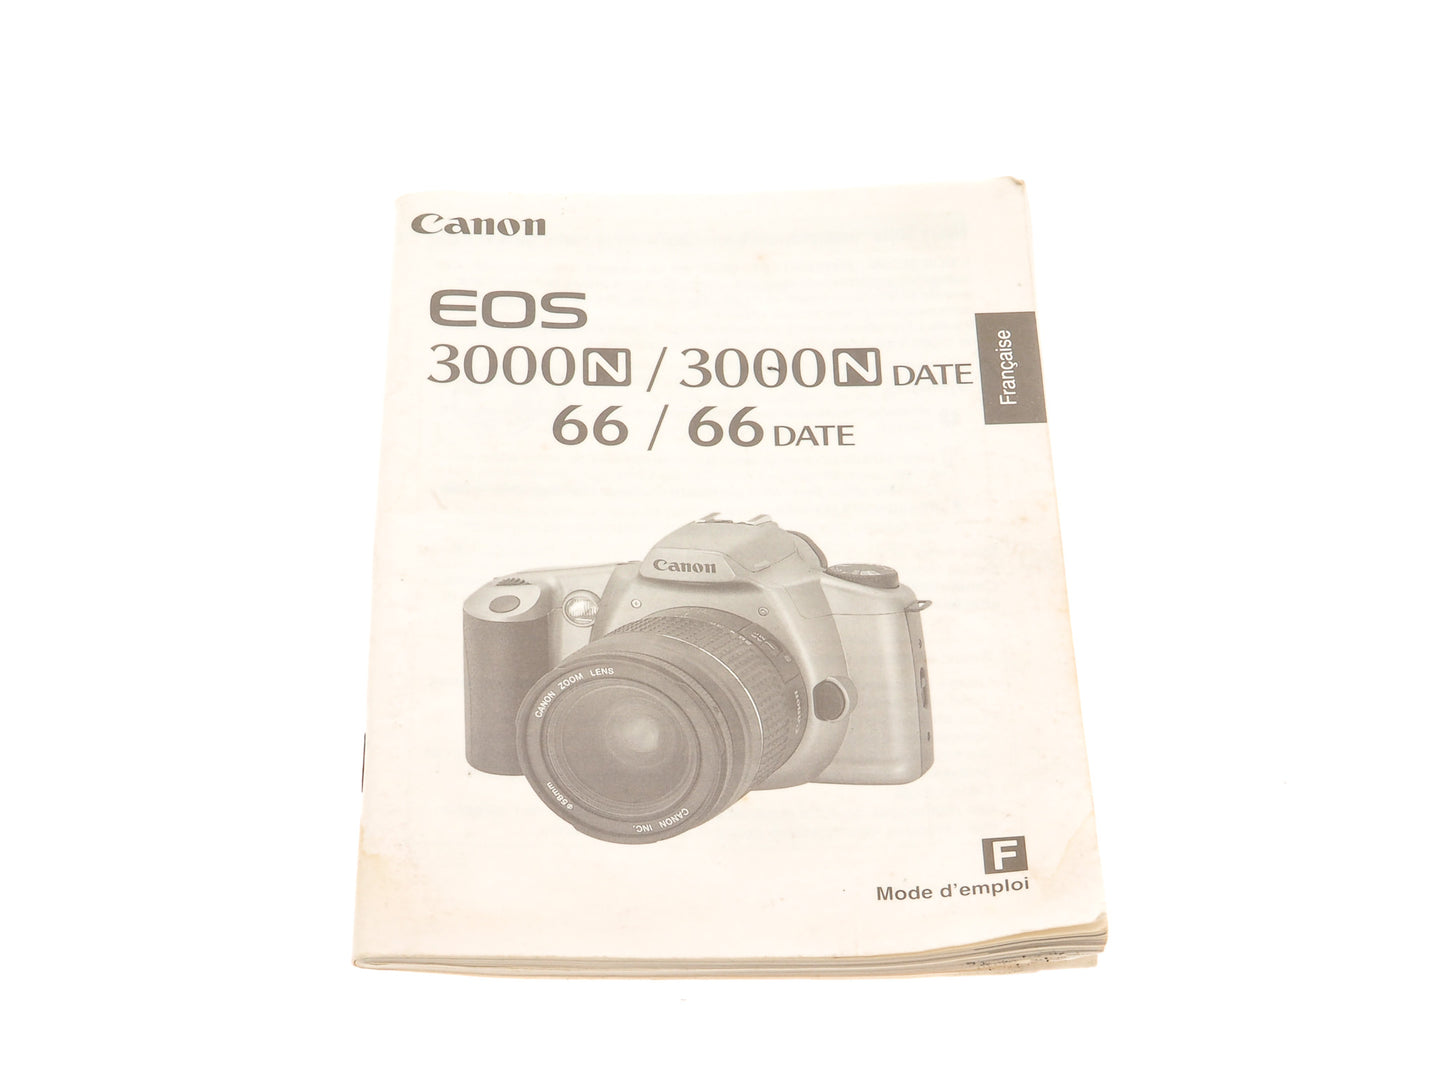 Canon EOS 3000N /3000N Date / 66 / 66 Date Instructions